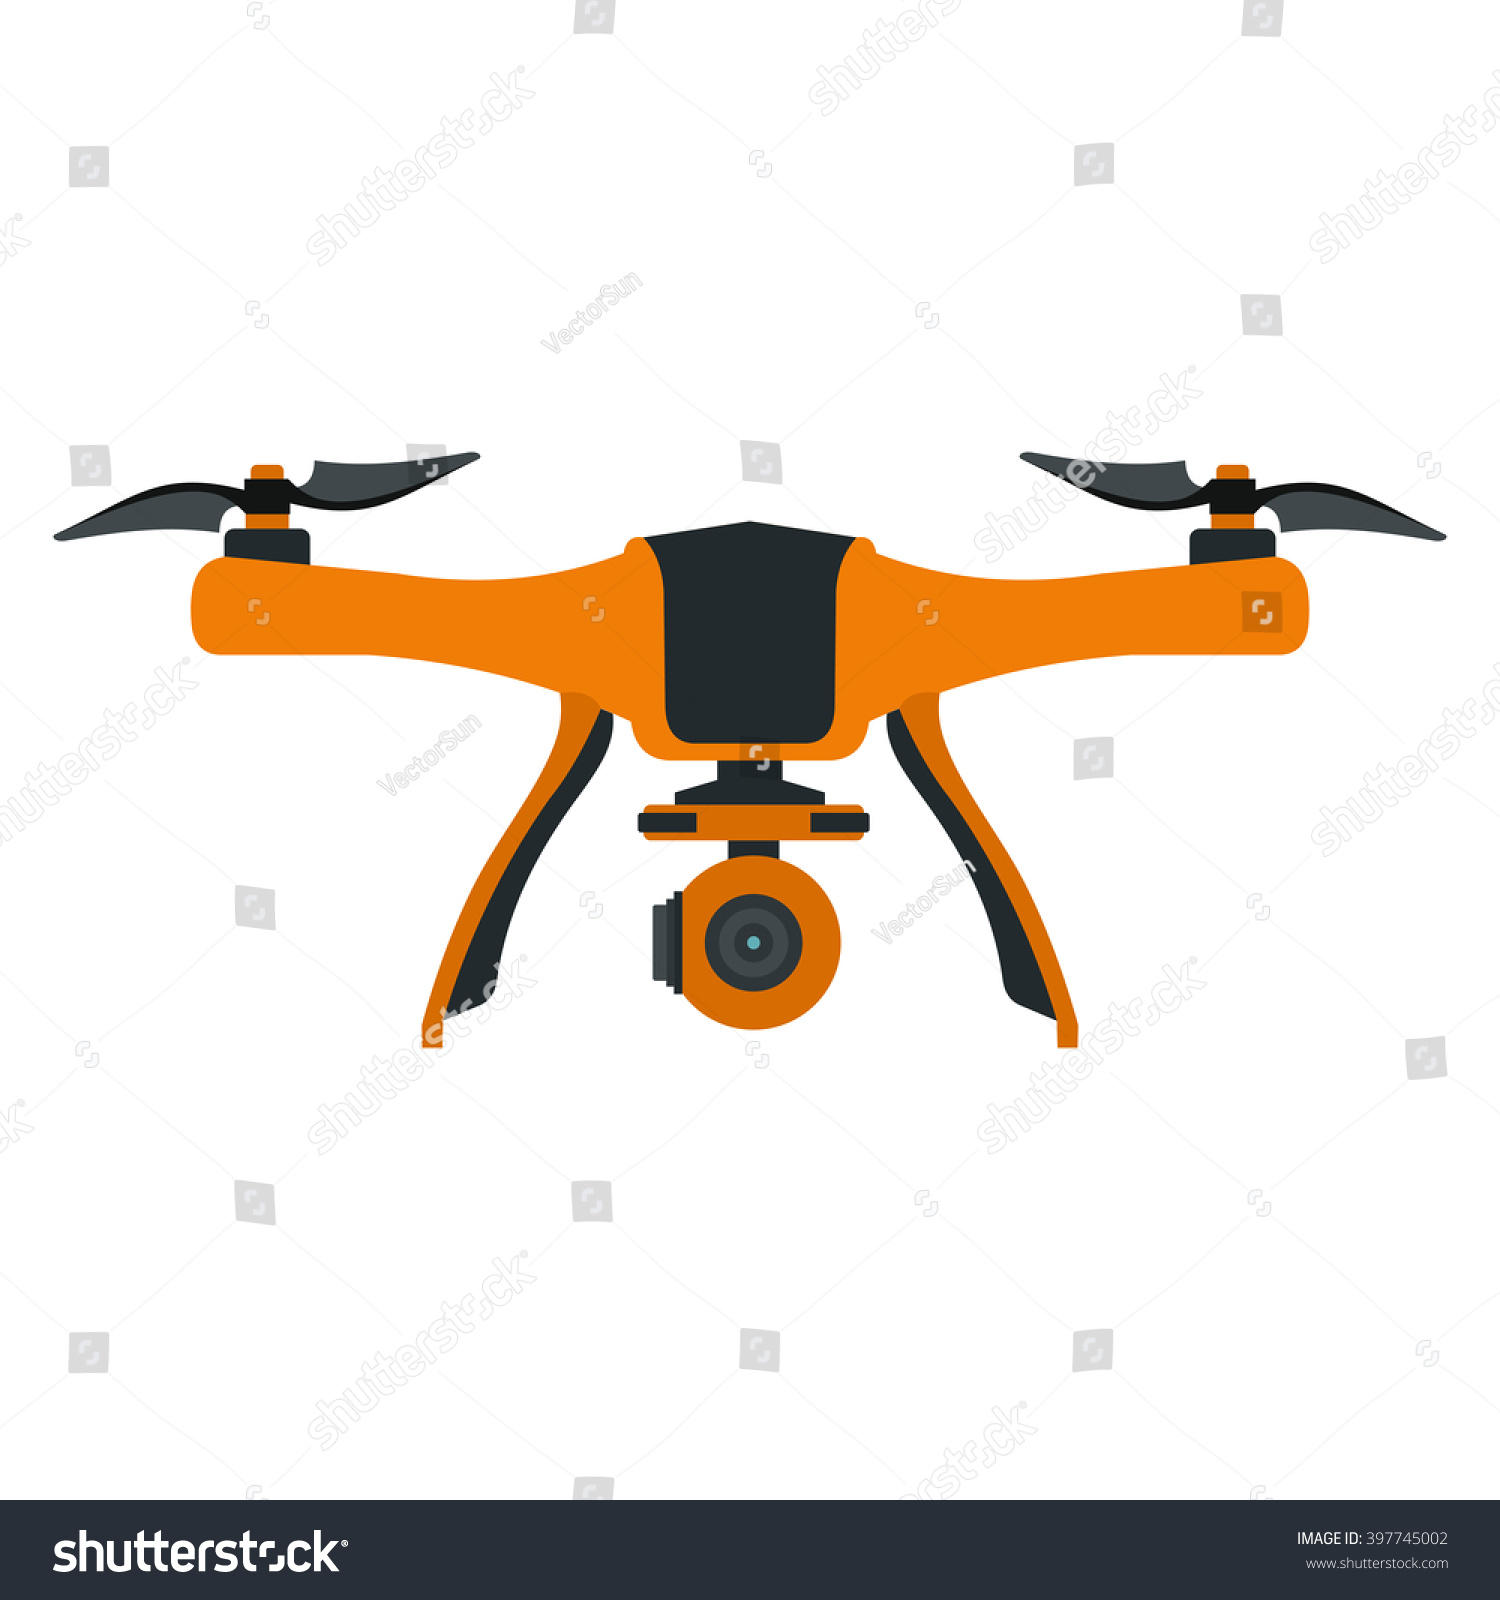 Vector Illustration Drone Quadrocopter Isolated On Stock Vector ...